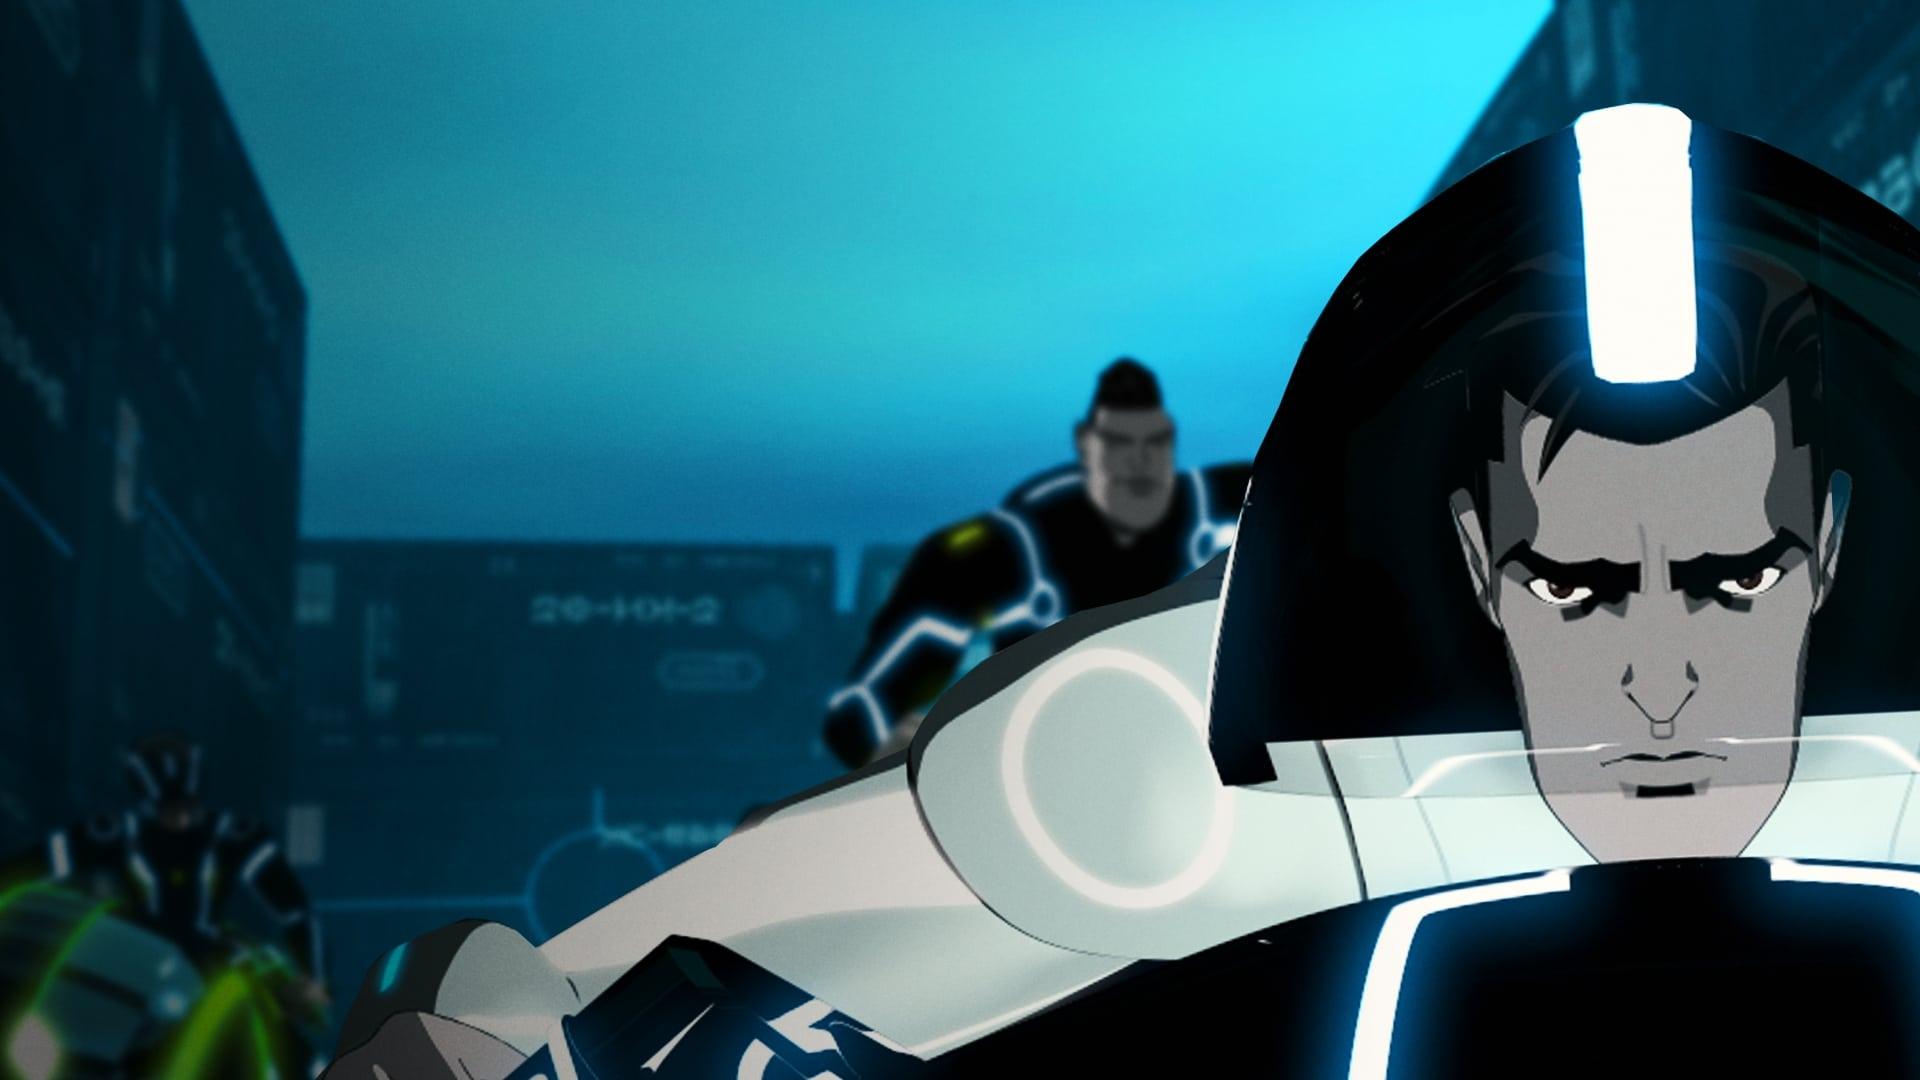 Currently rewatching Tron: Uprising with my young kids and they love it.  I'm still in awe of its stunning animation and soundtrack and am sadly  reminded of what a damn shame it